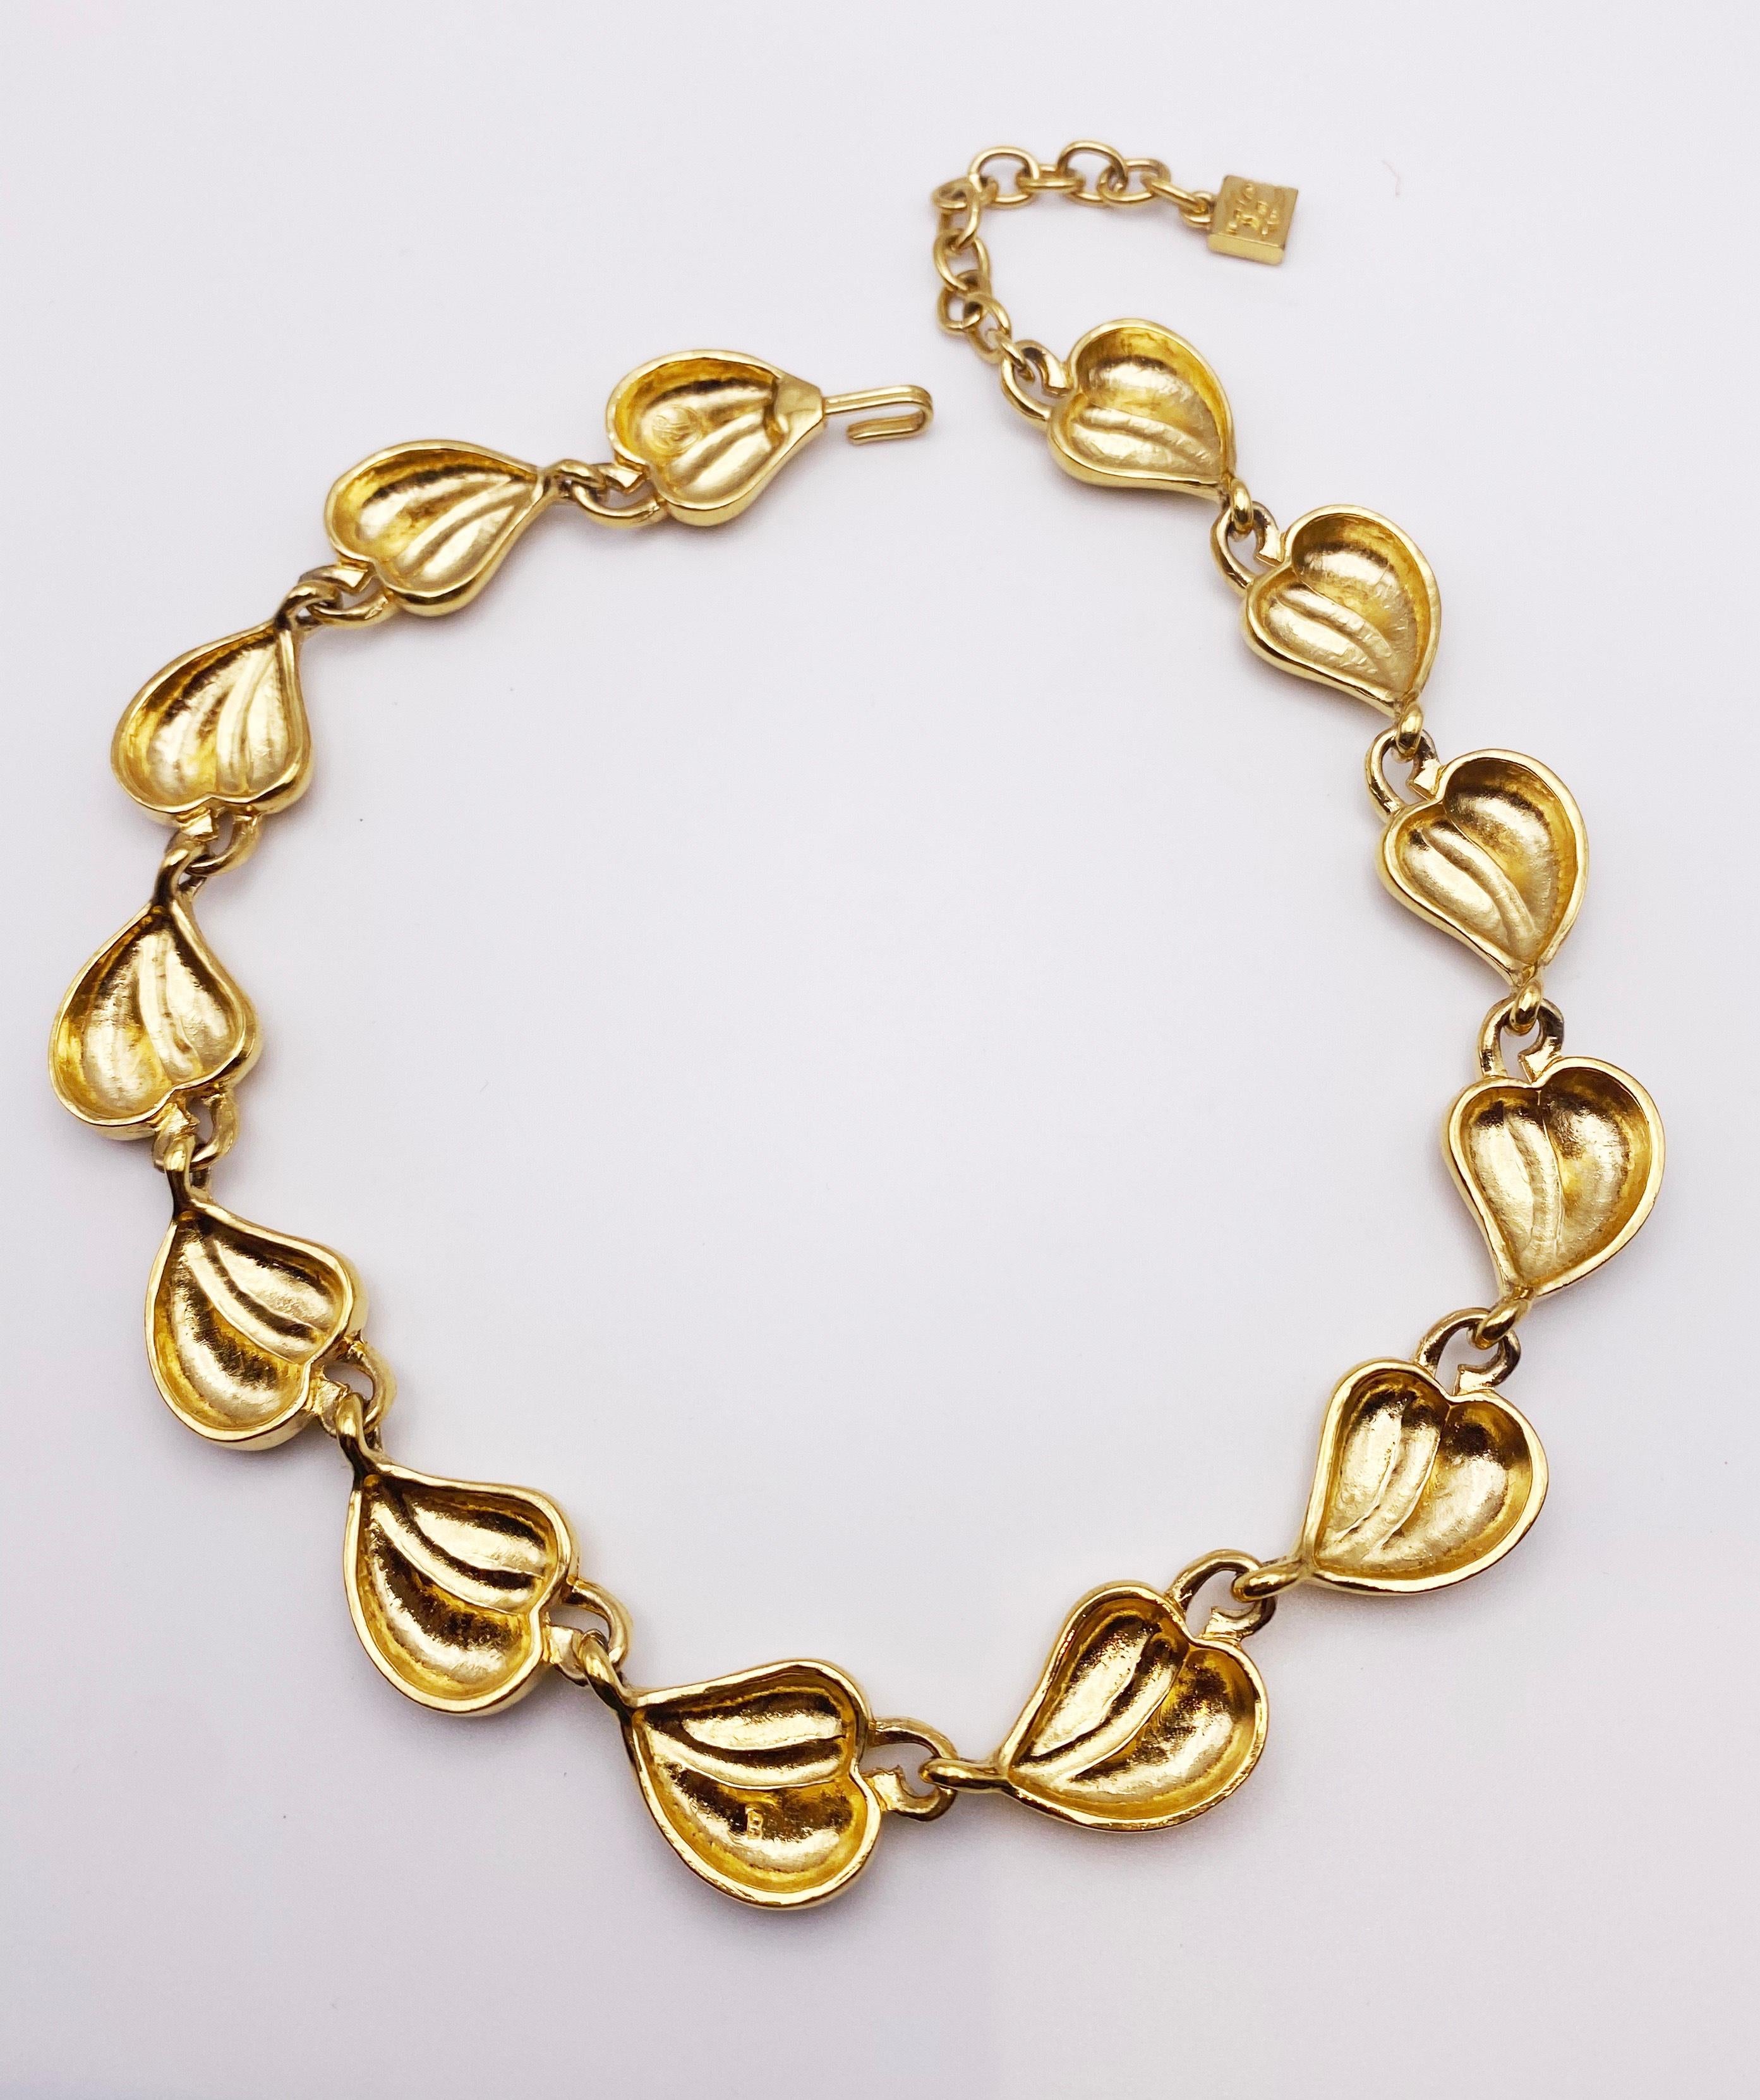 Stunning gilt necklace design by Karl Lagerfeld.  Stamped KL. Adjustable length. A beautiful piece to style with contemporary clothing trends. Good vintage condition. 